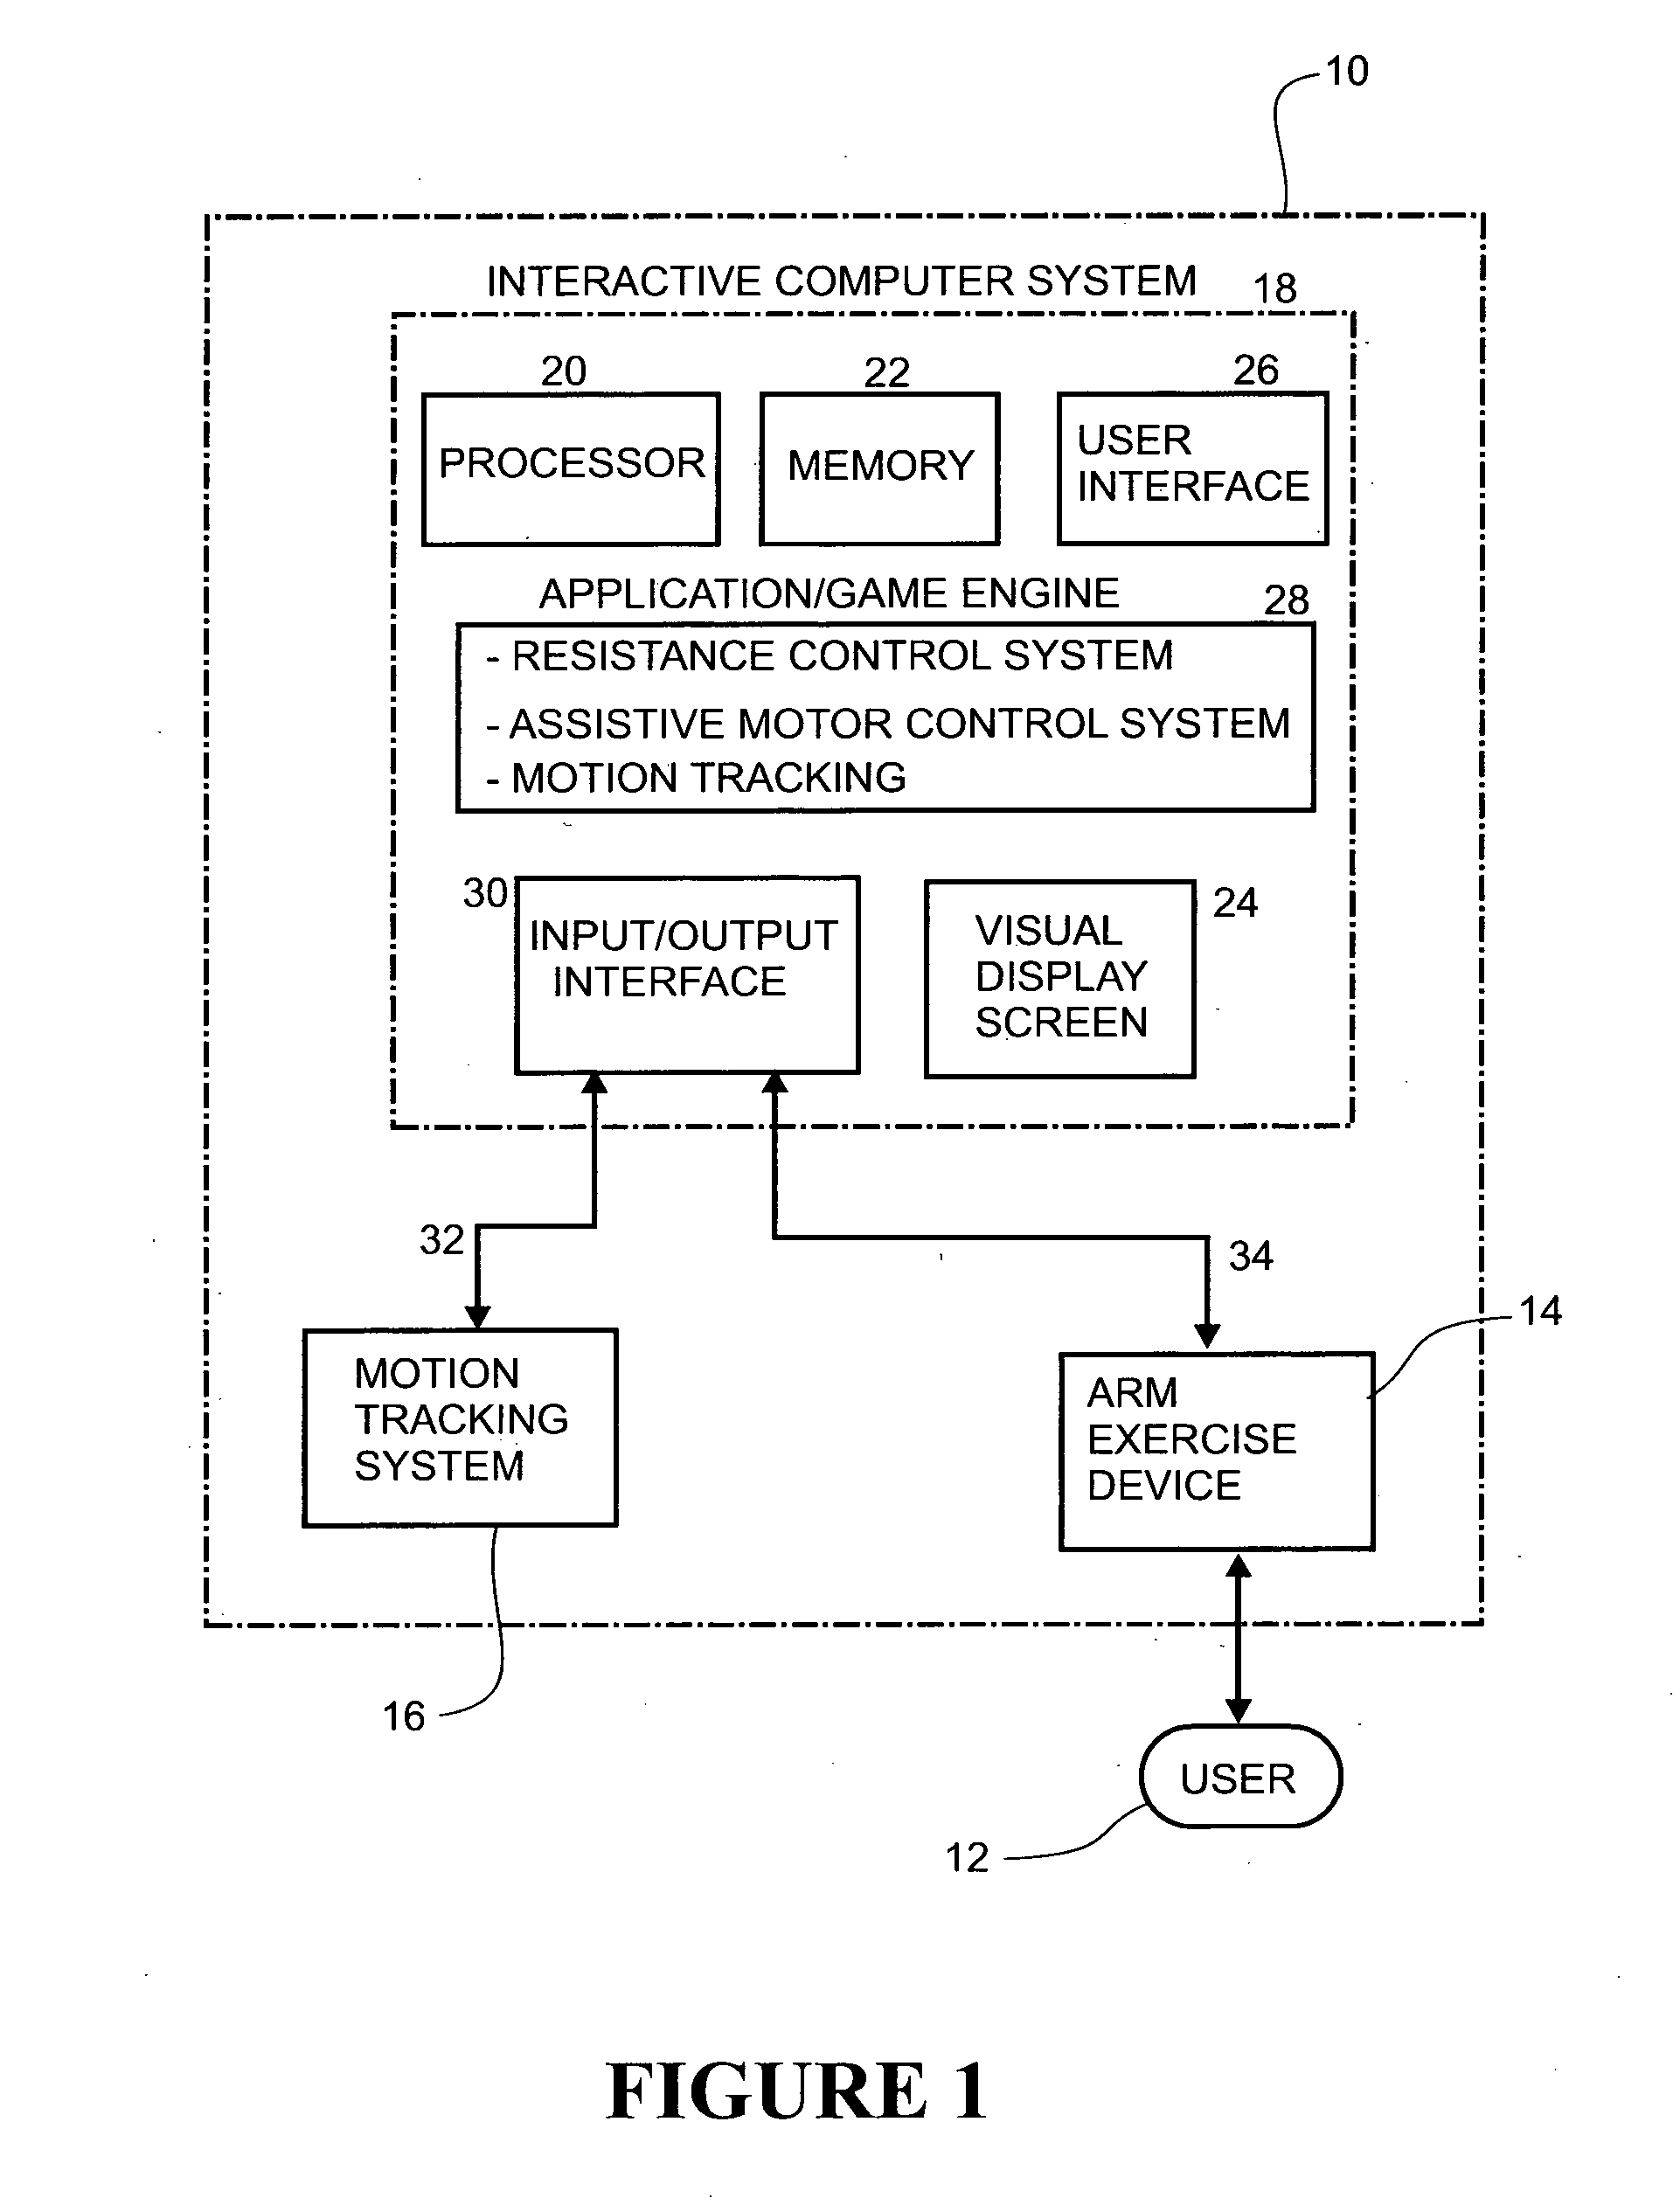 Arm Exercise Device and System